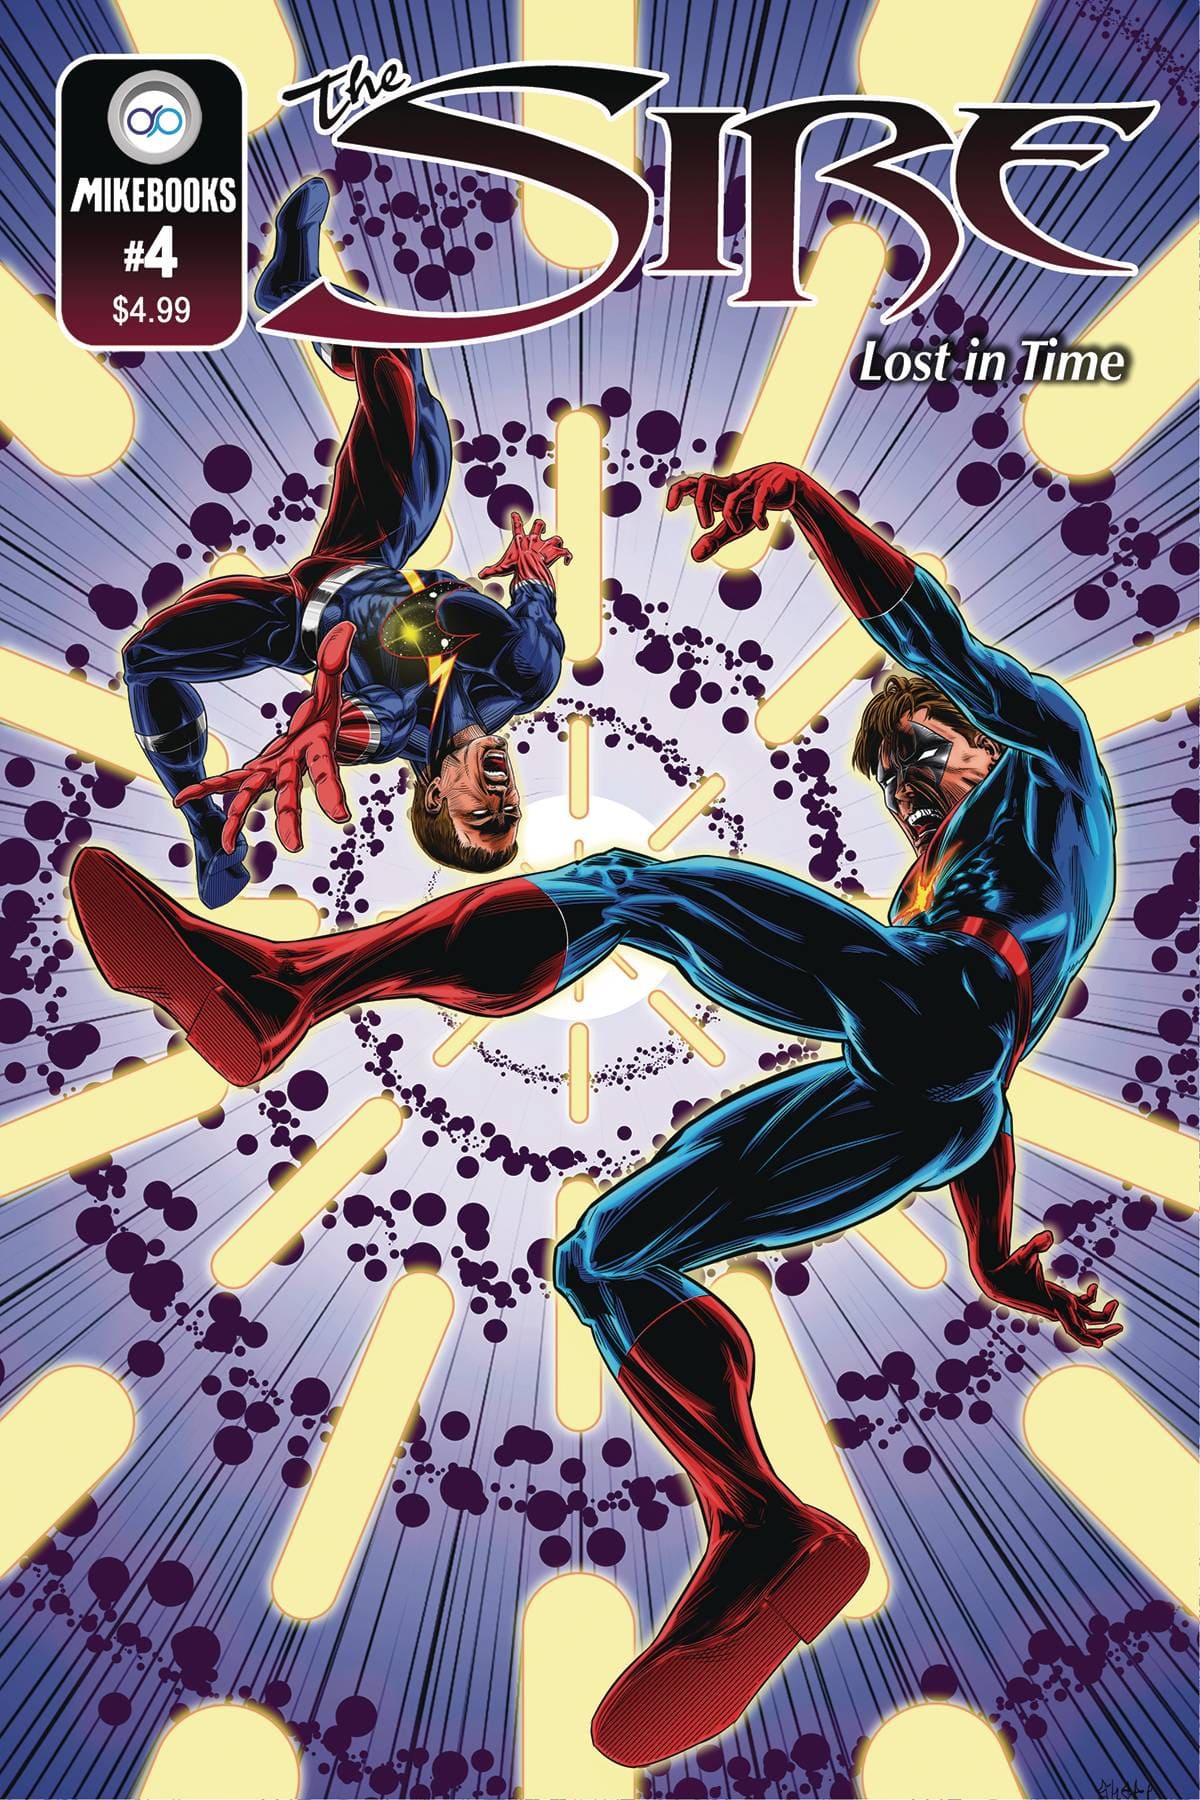 SIRE LOST IN TIME #4 (OF 5) (C: 0-1-1) Comic Cover Image